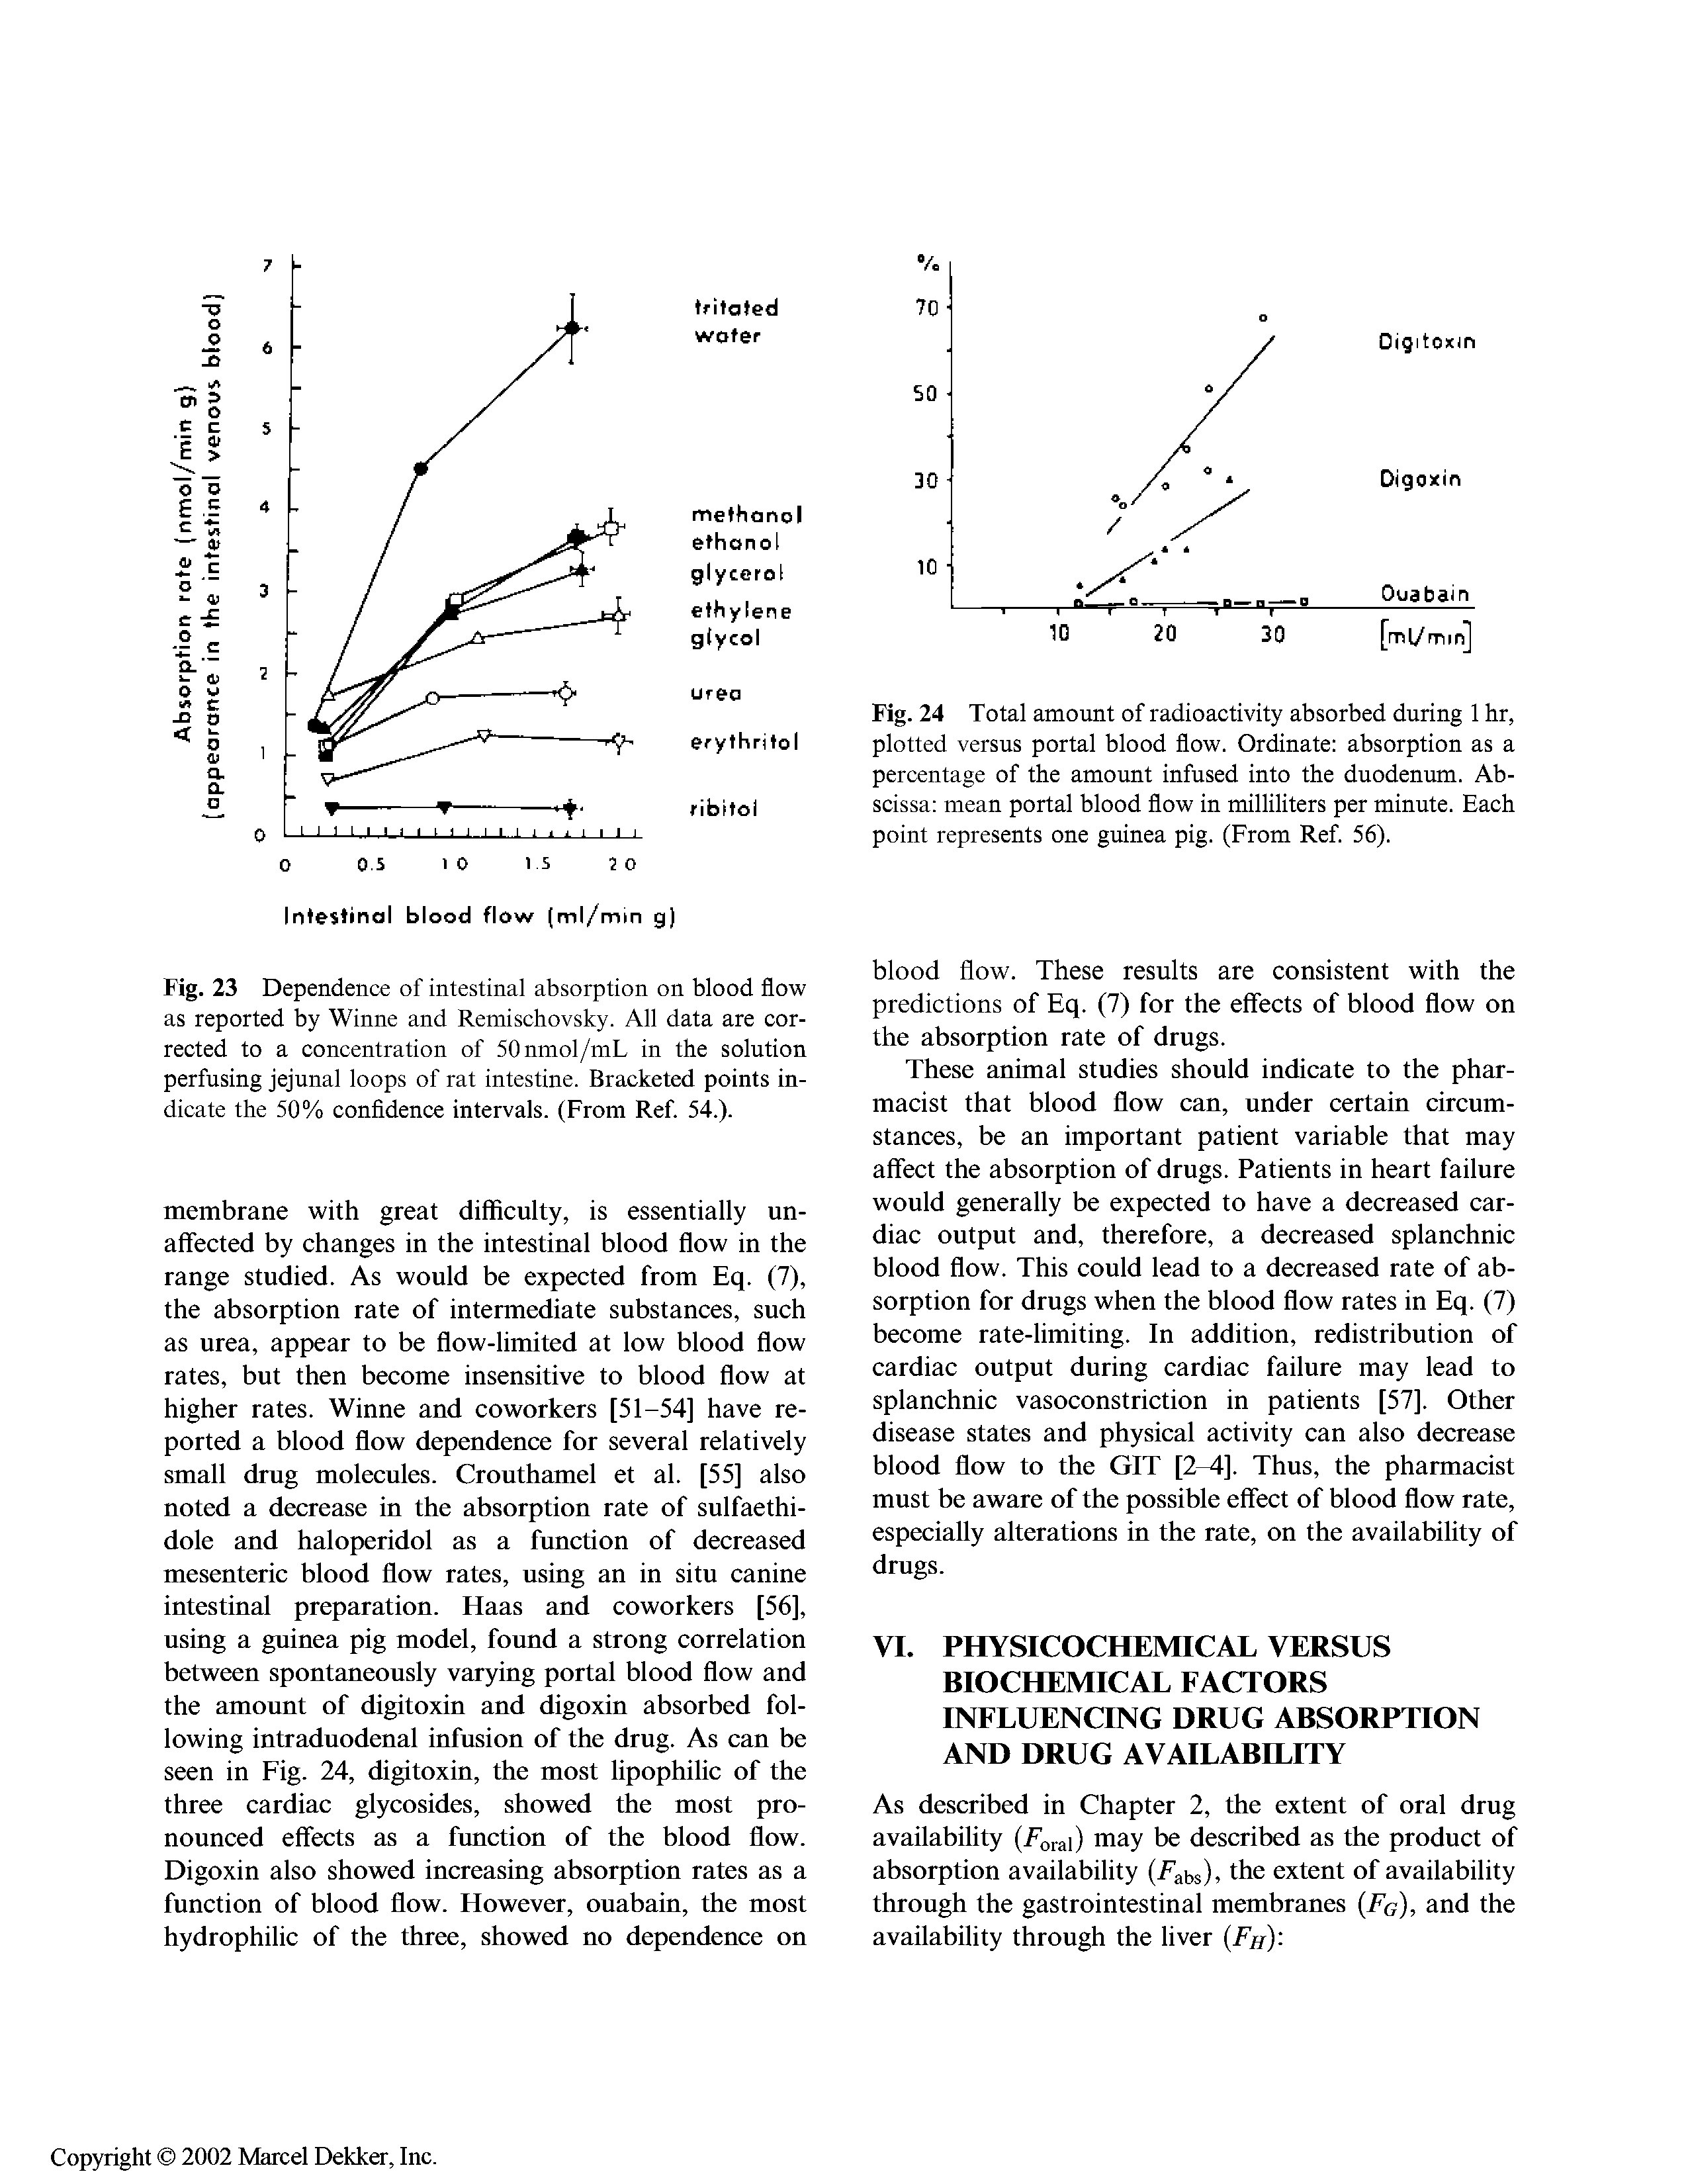 Fig. 24 Total amount of radioactivity absorbed during 1 hr, plotted versus portal blood flow. Ordinate absorption as a percentage of the amount infused into the duodenum. Abscissa mean portal blood flow in milliliters per minute. Each point represents one guinea pig. (From Ref. 56).